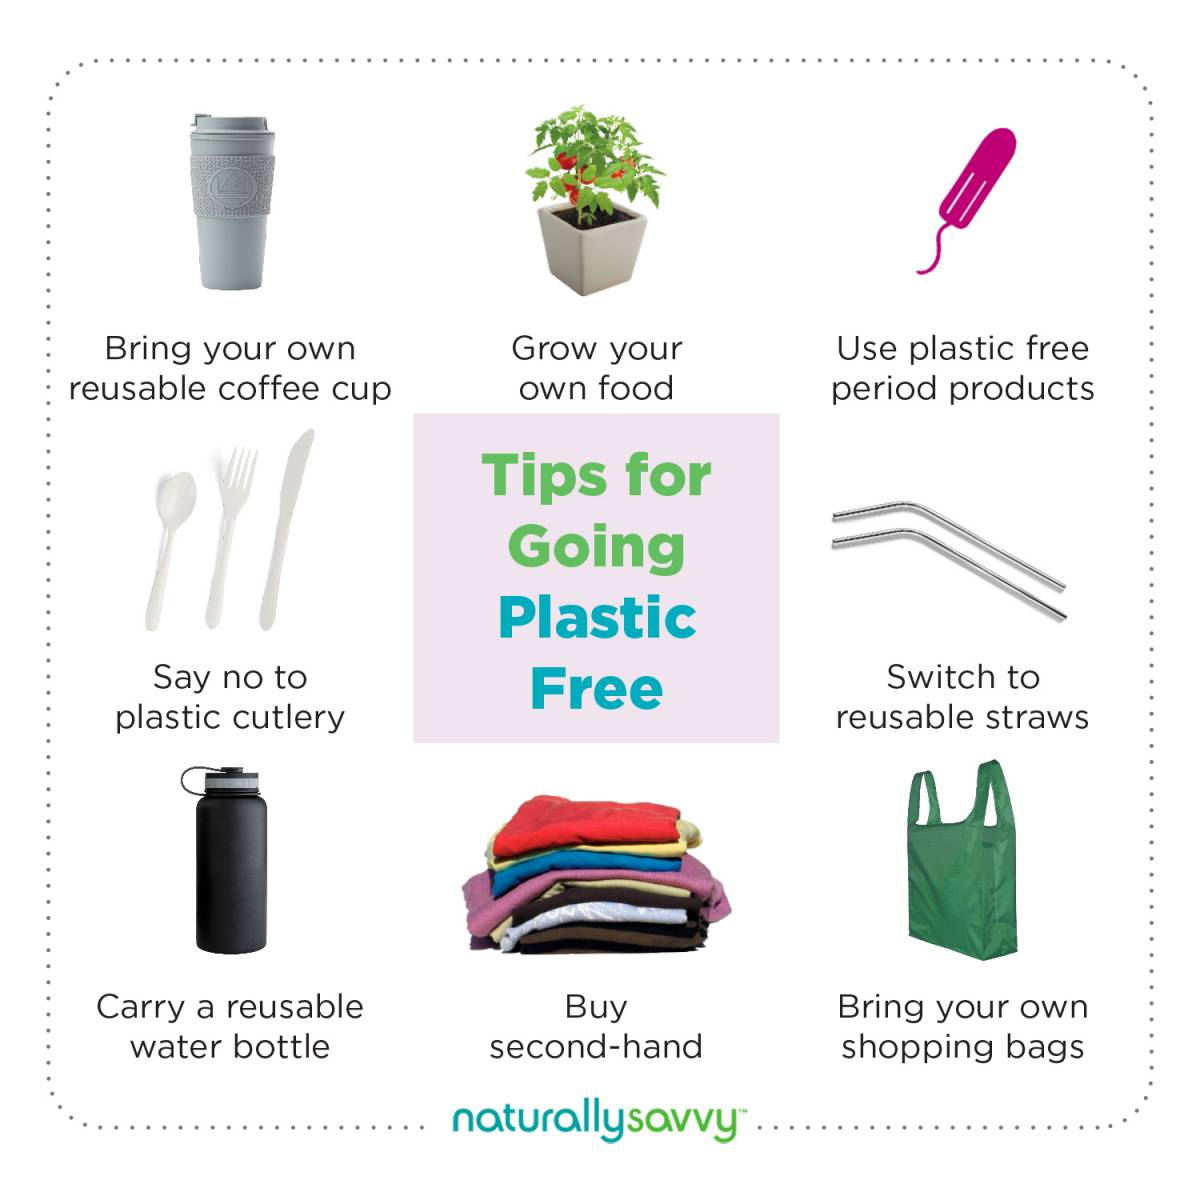 Simple Tips To Help Your Family Reduce Plastic Waste – TUM TUM TOTS